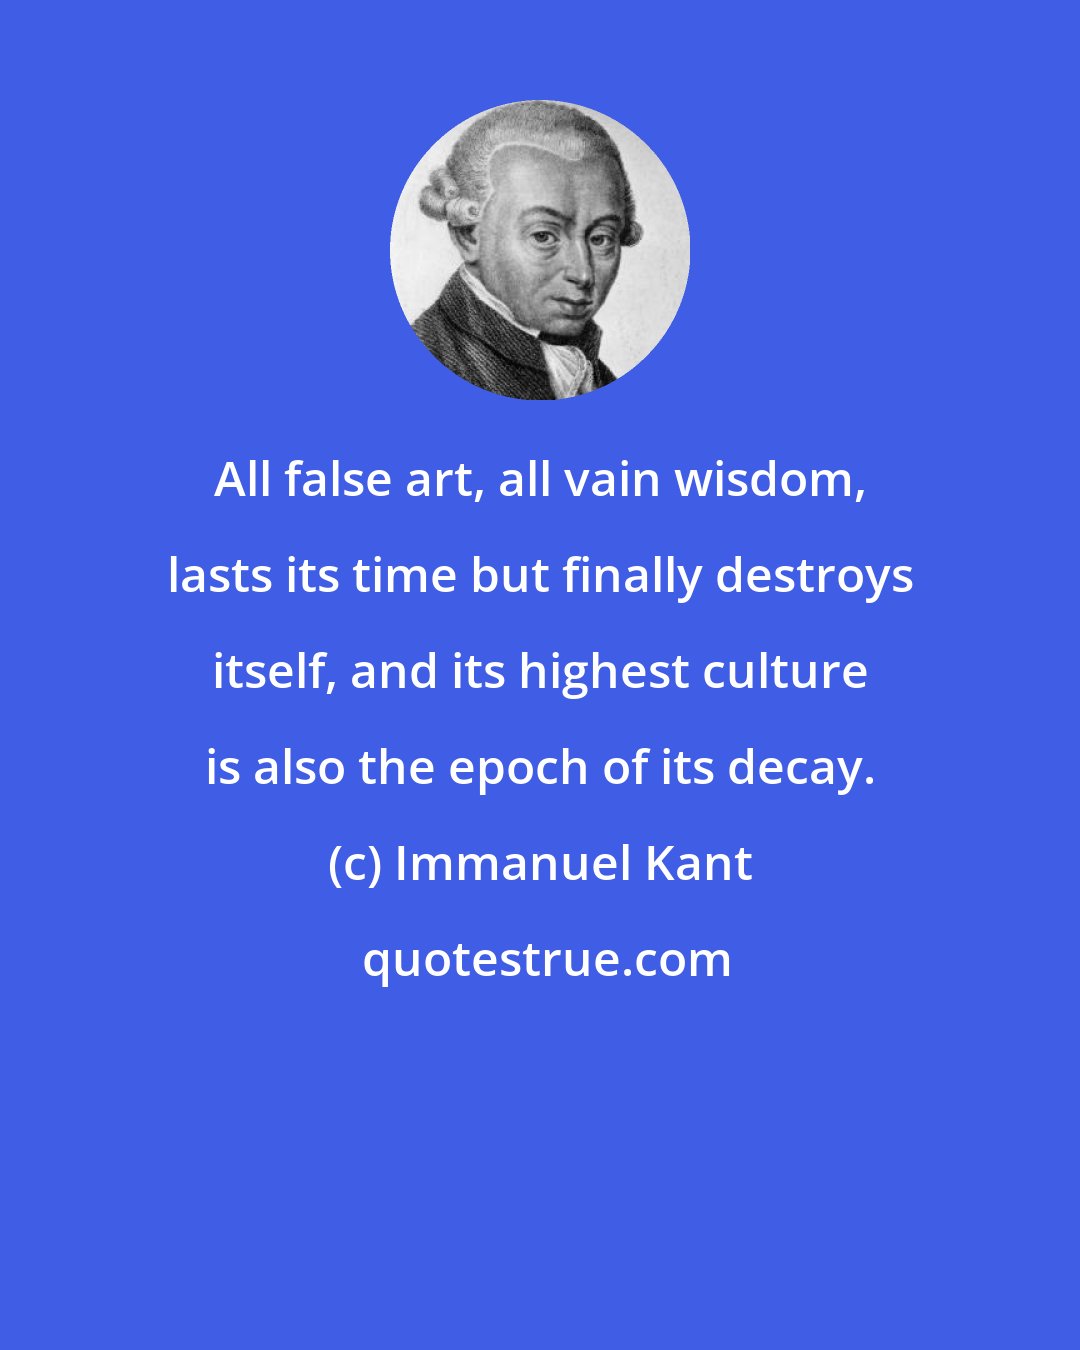 Immanuel Kant: All false art, all vain wisdom, lasts its time but finally destroys itself, and its highest culture is also the epoch of its decay.